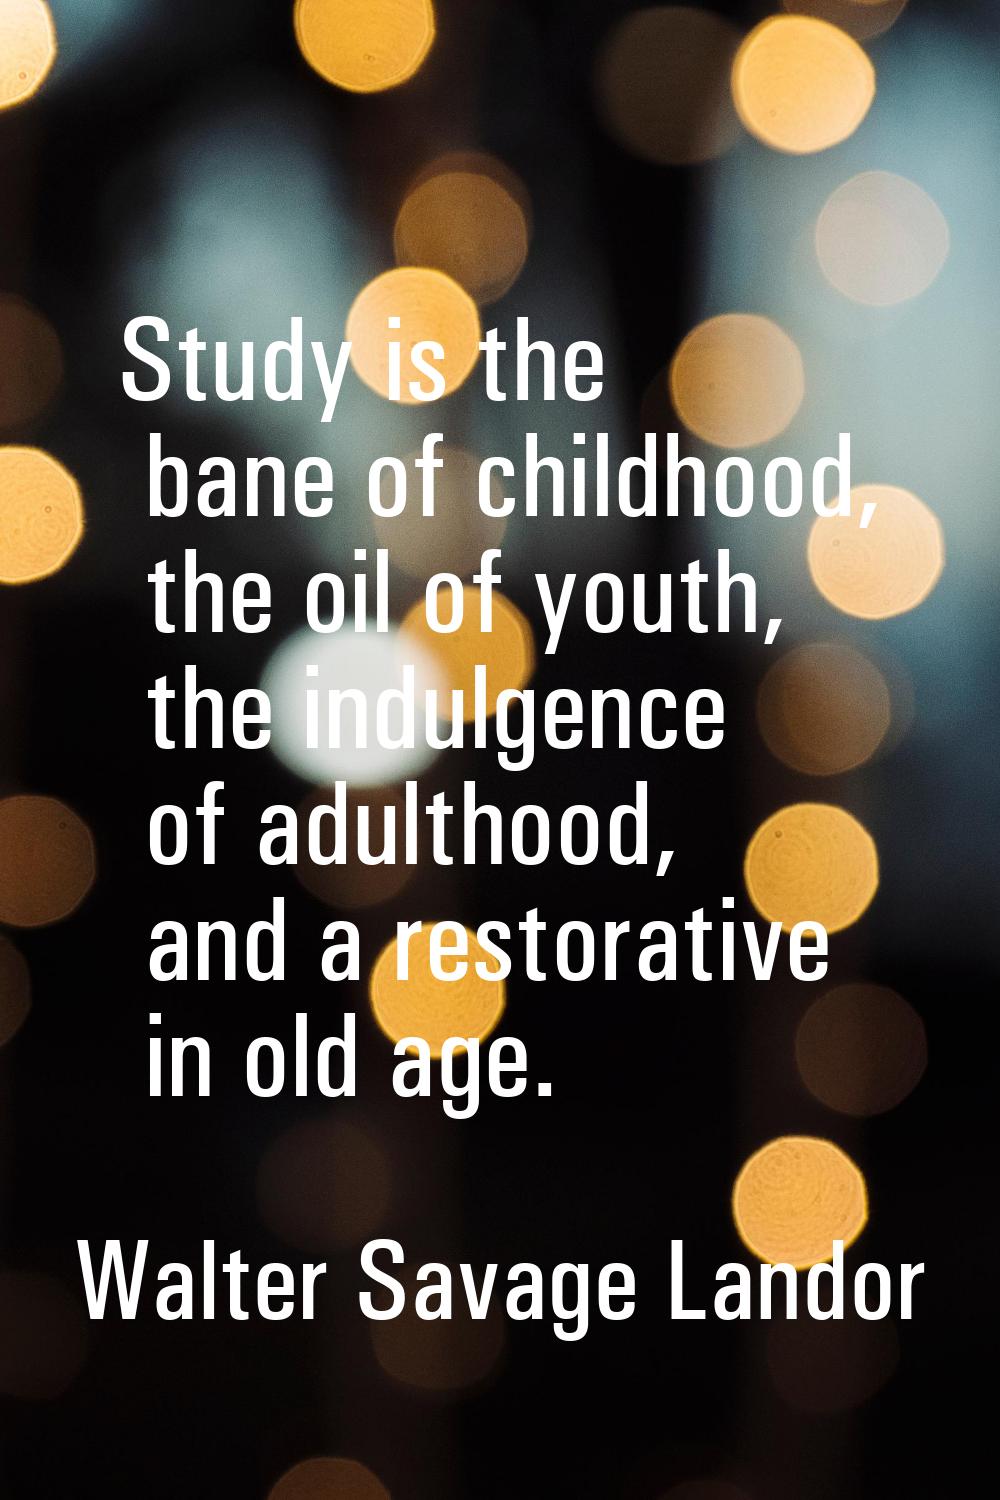 Study is the bane of childhood, the oil of youth, the indulgence of adulthood, and a restorative in